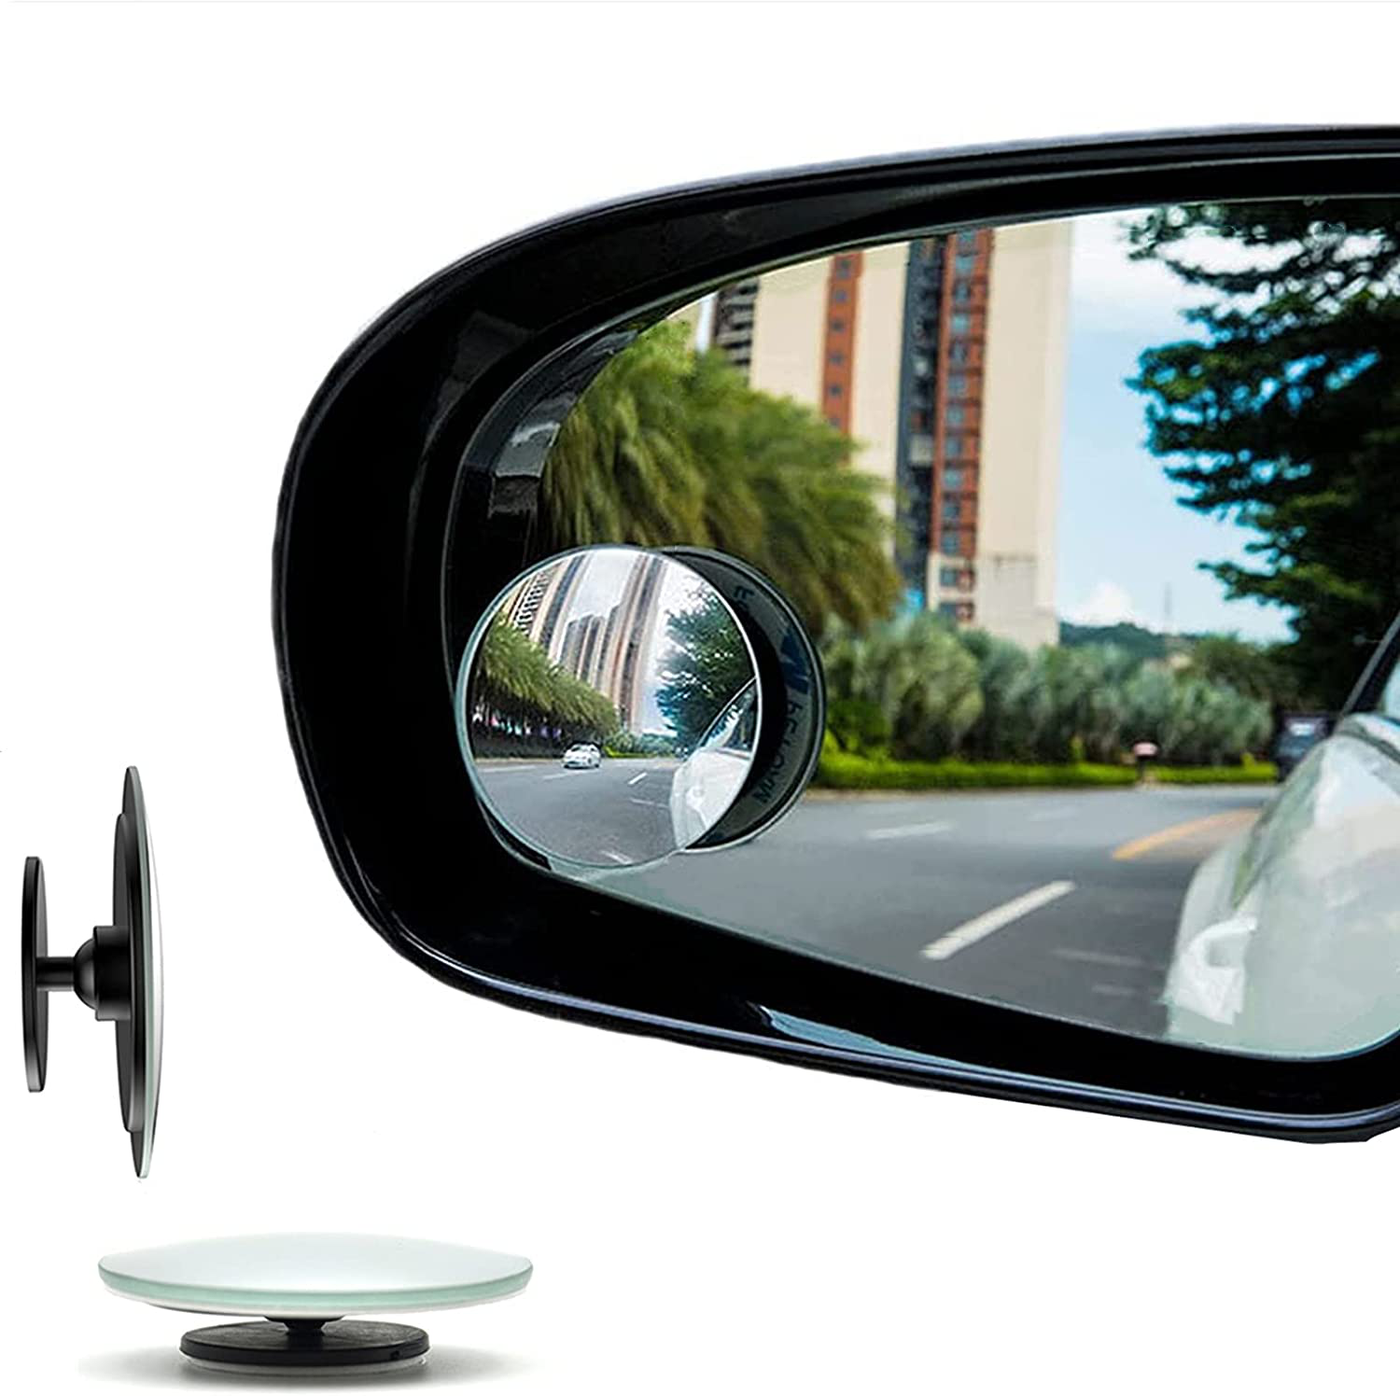 TINGQIAO Blind Spot Mirrors,HD Glass Convex Rear View Mirror, 360 ABS HD Ultra Low-Profile Glass Fit Stick-on Design Fit for All Universal Vehicles Car SUV Truck RVs Vans(Pack of 2) (Sector)